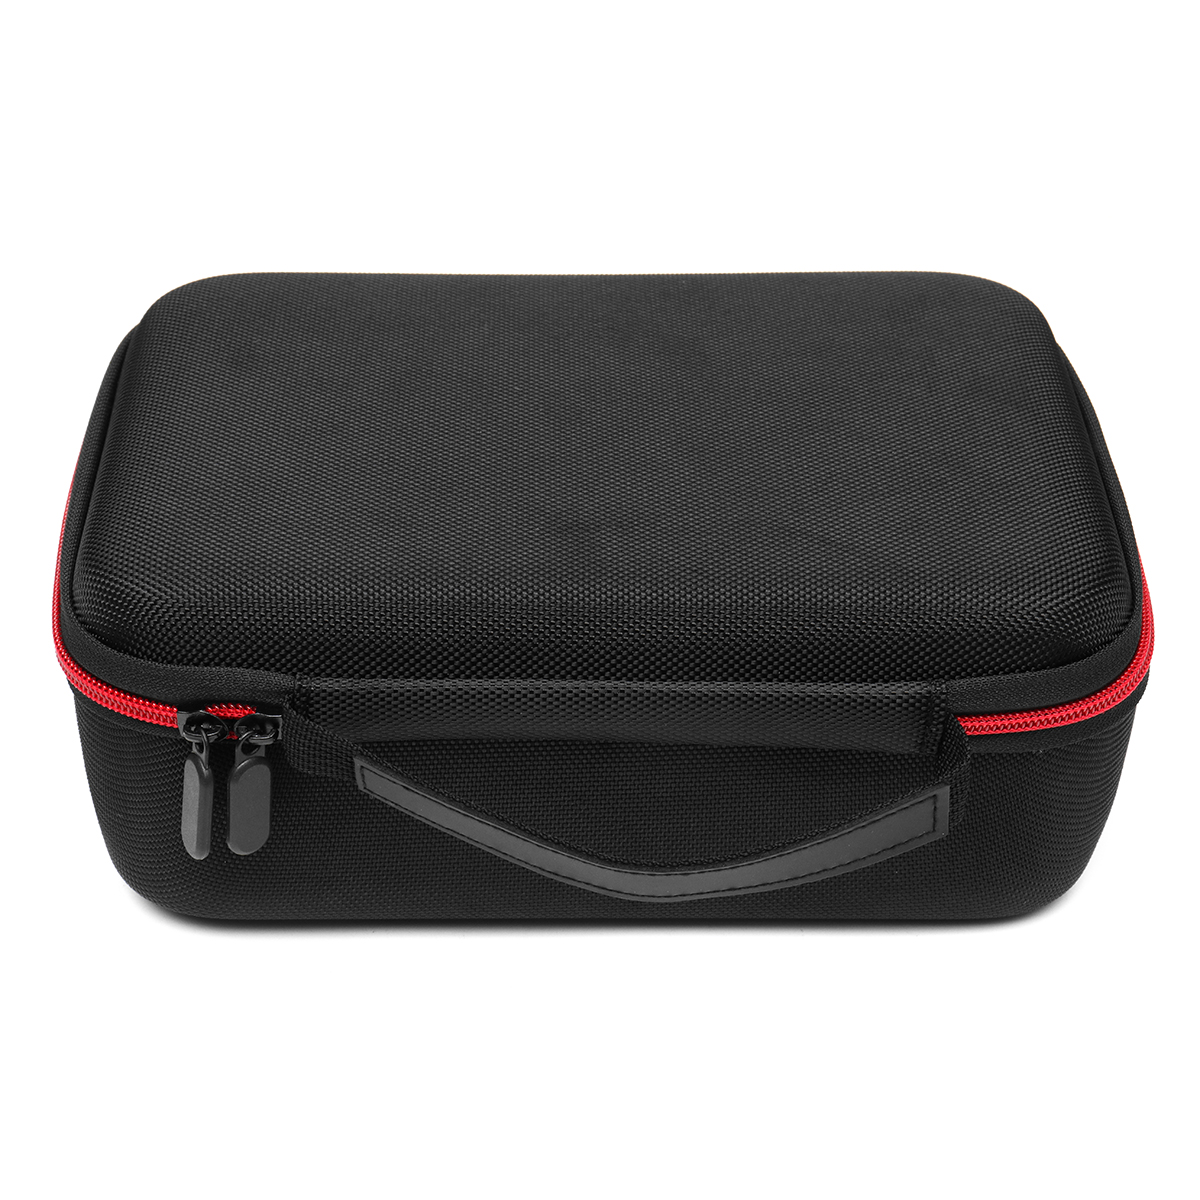 Portable Travel Storage Box Carry Case Bag For Nintendo Switch MINI SFC Game Console 12